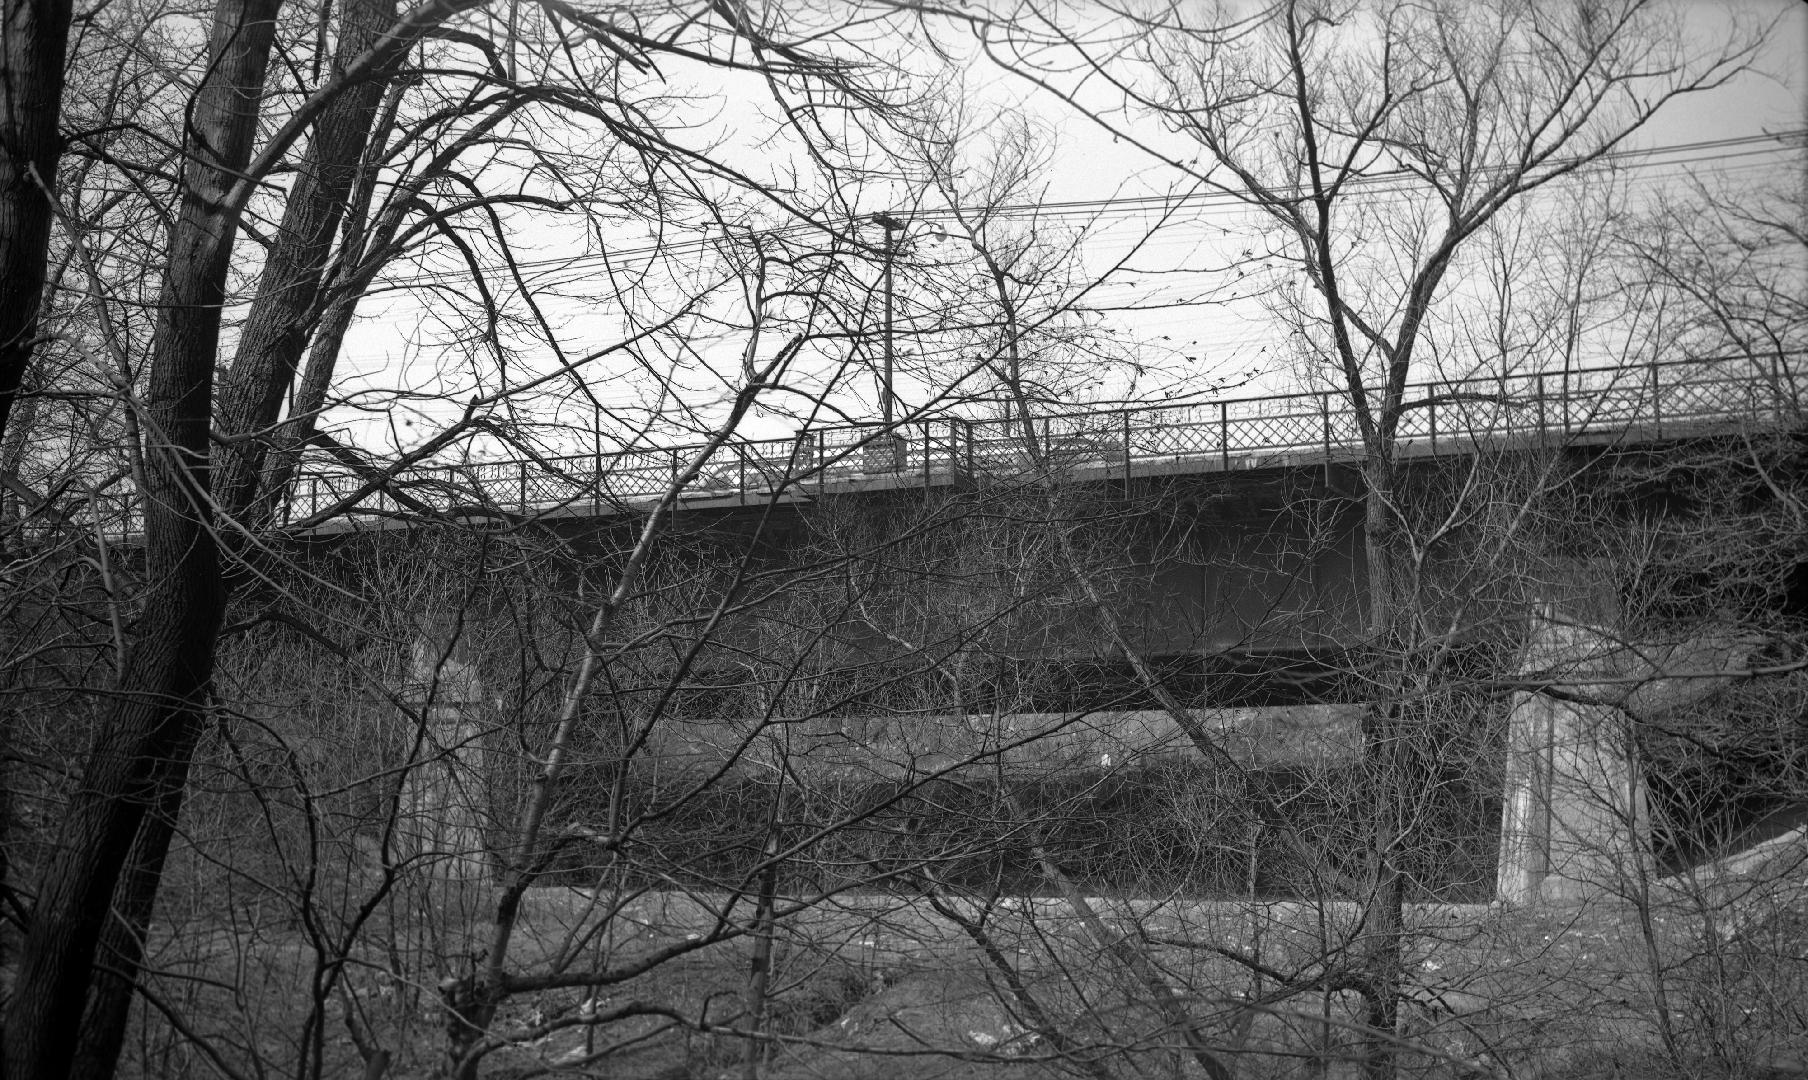 Image shows a bridge view from the park side.